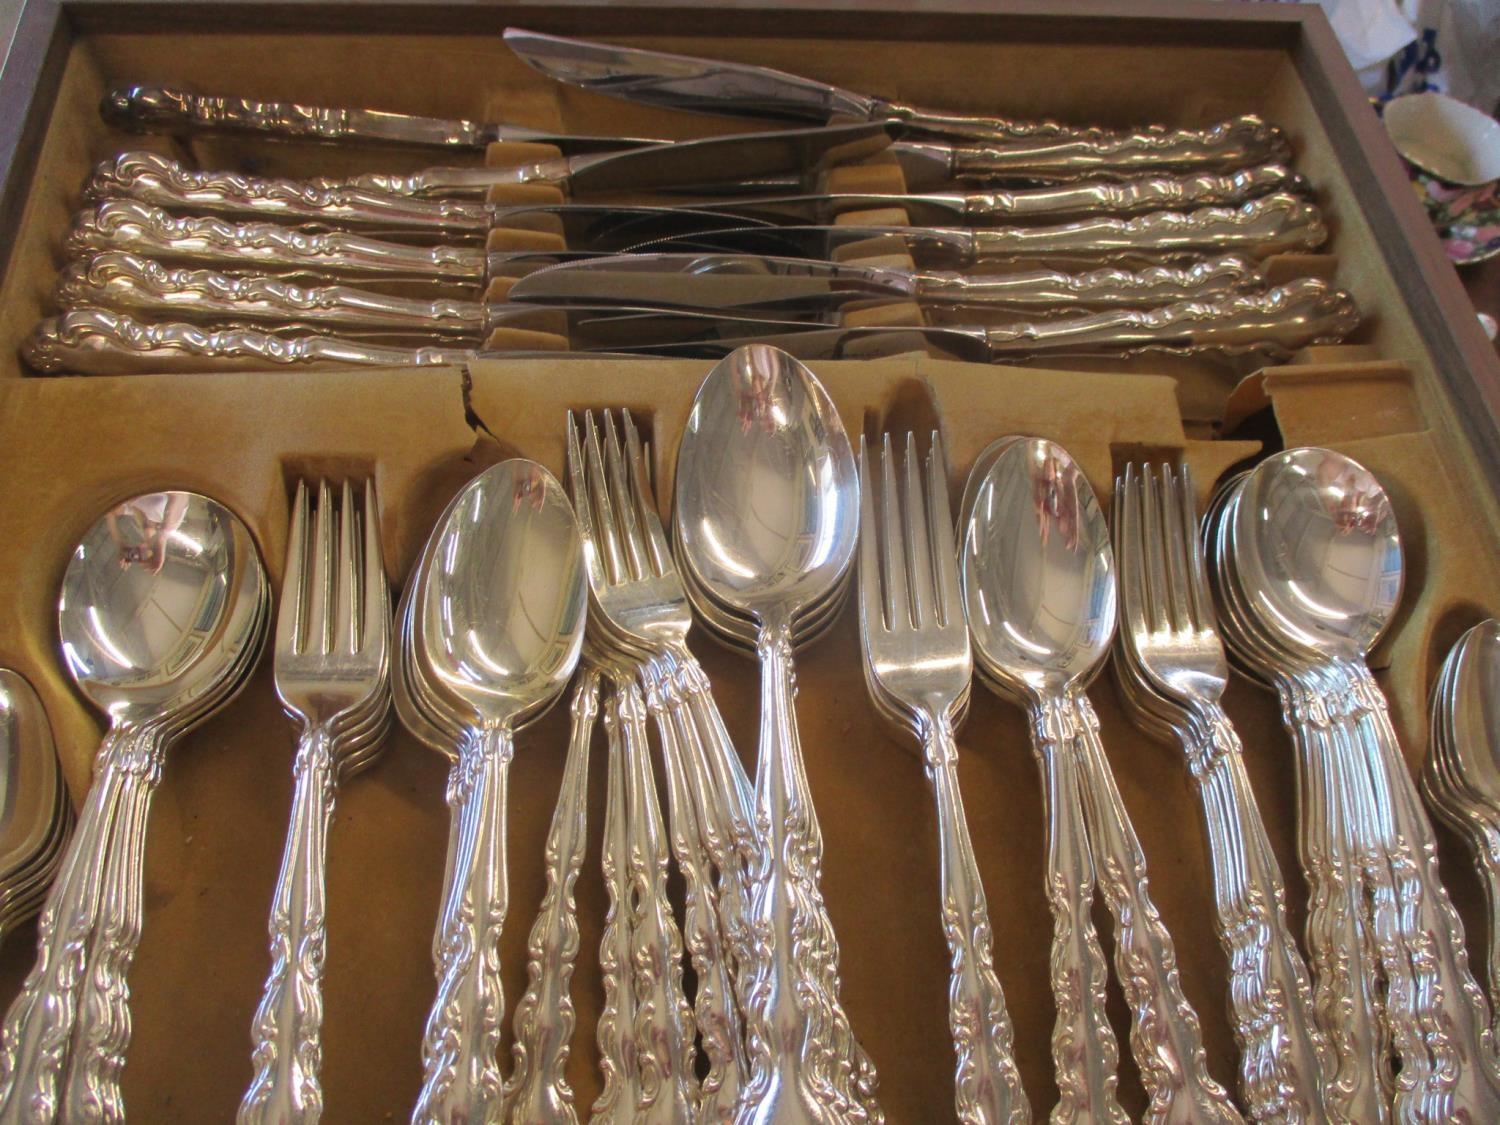 A canteen of Oneida Community silver plated cutlery, 12 place setting and additional pieces.